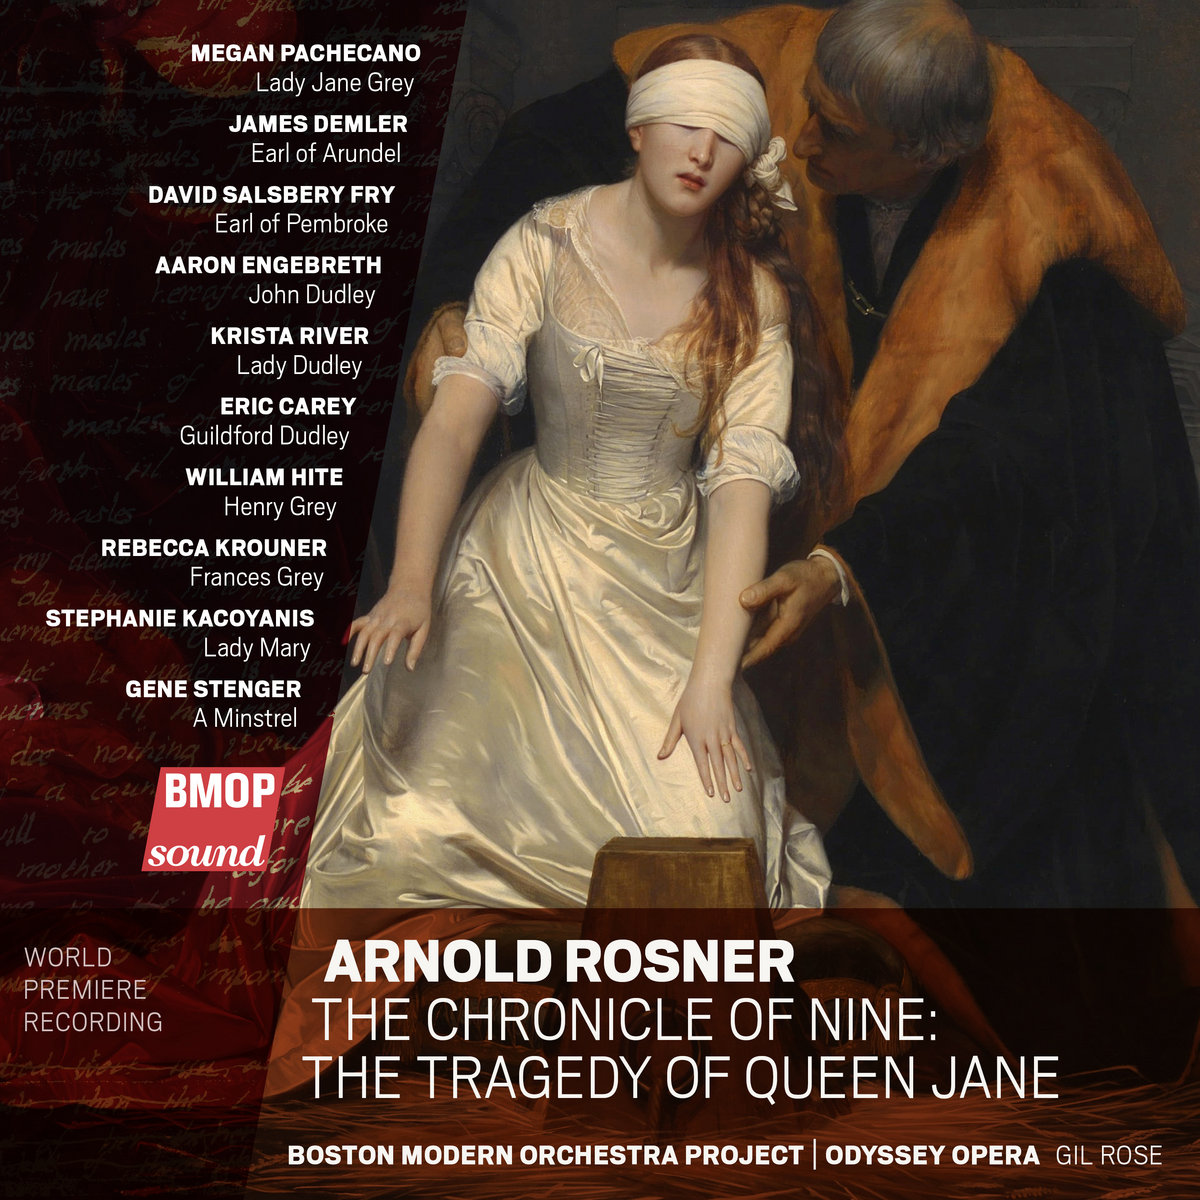 Review of ROSNER The Chronicle of Nine: The Tragedy of Queen Jane